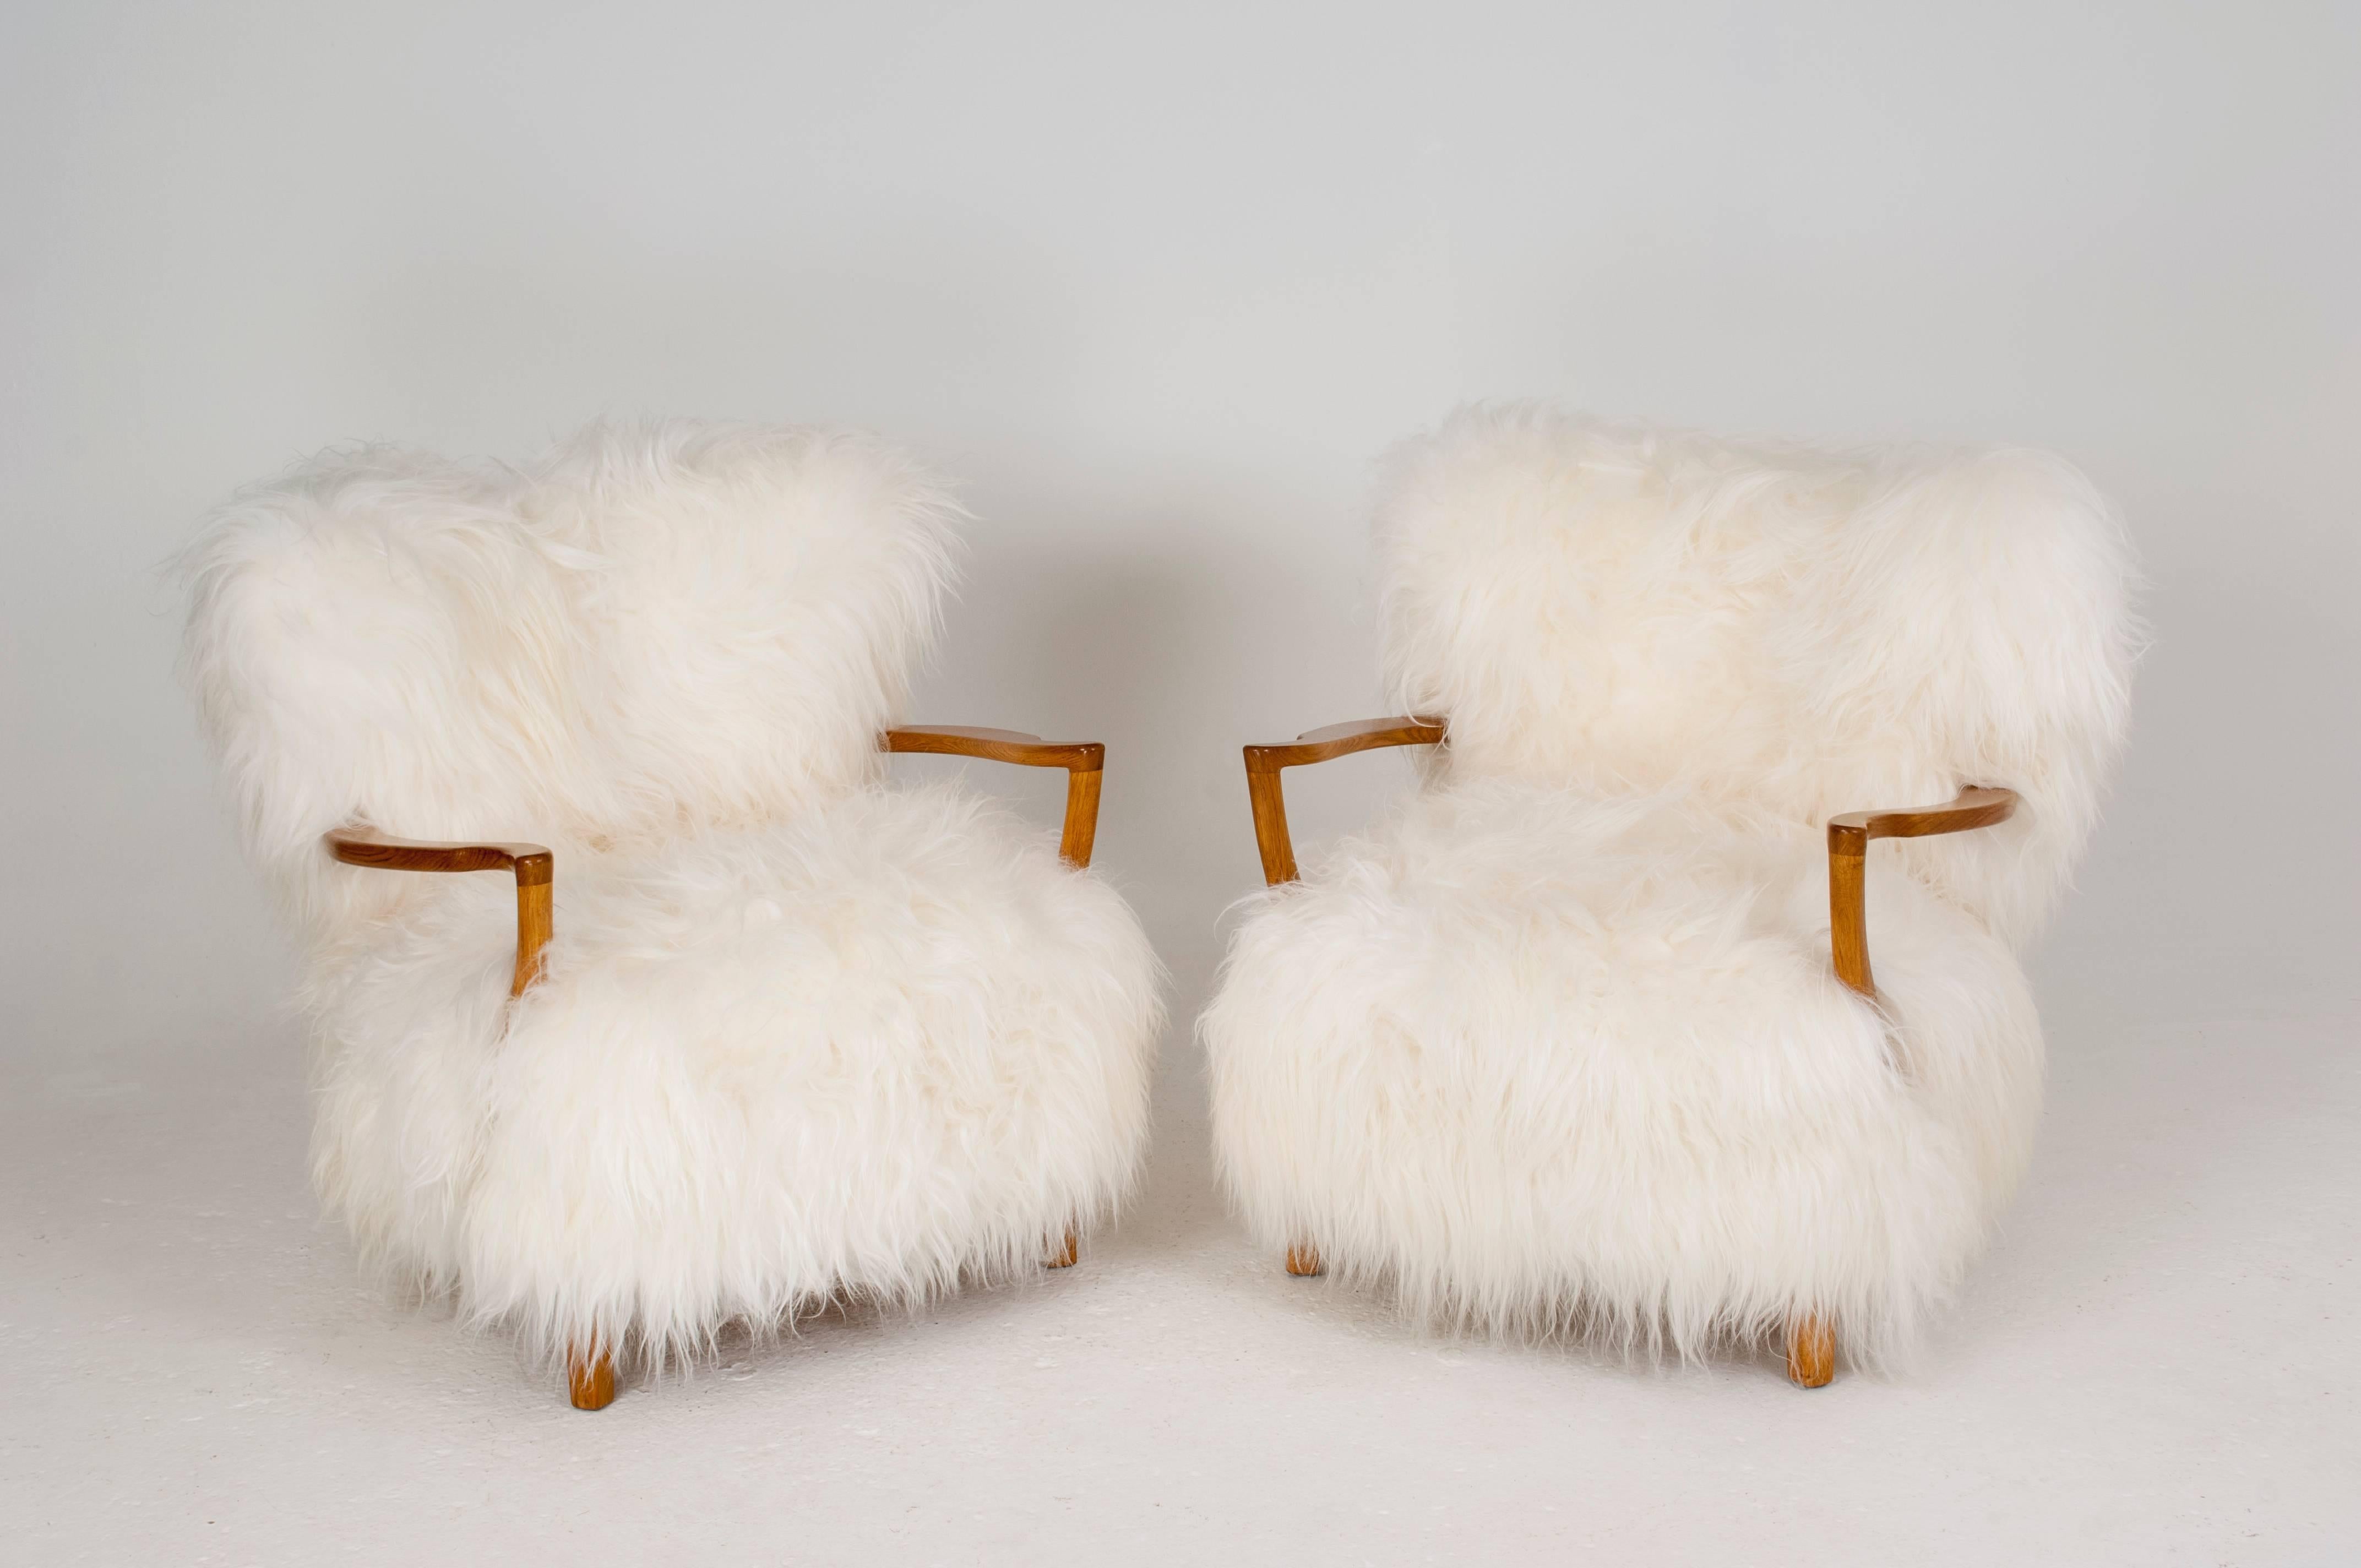 Fritz Schlegel (attributed) 

Pair of Easy Chairs, upholstered with long Icelandic sheepskin. Oak Arm and legs

Designed ca 1930